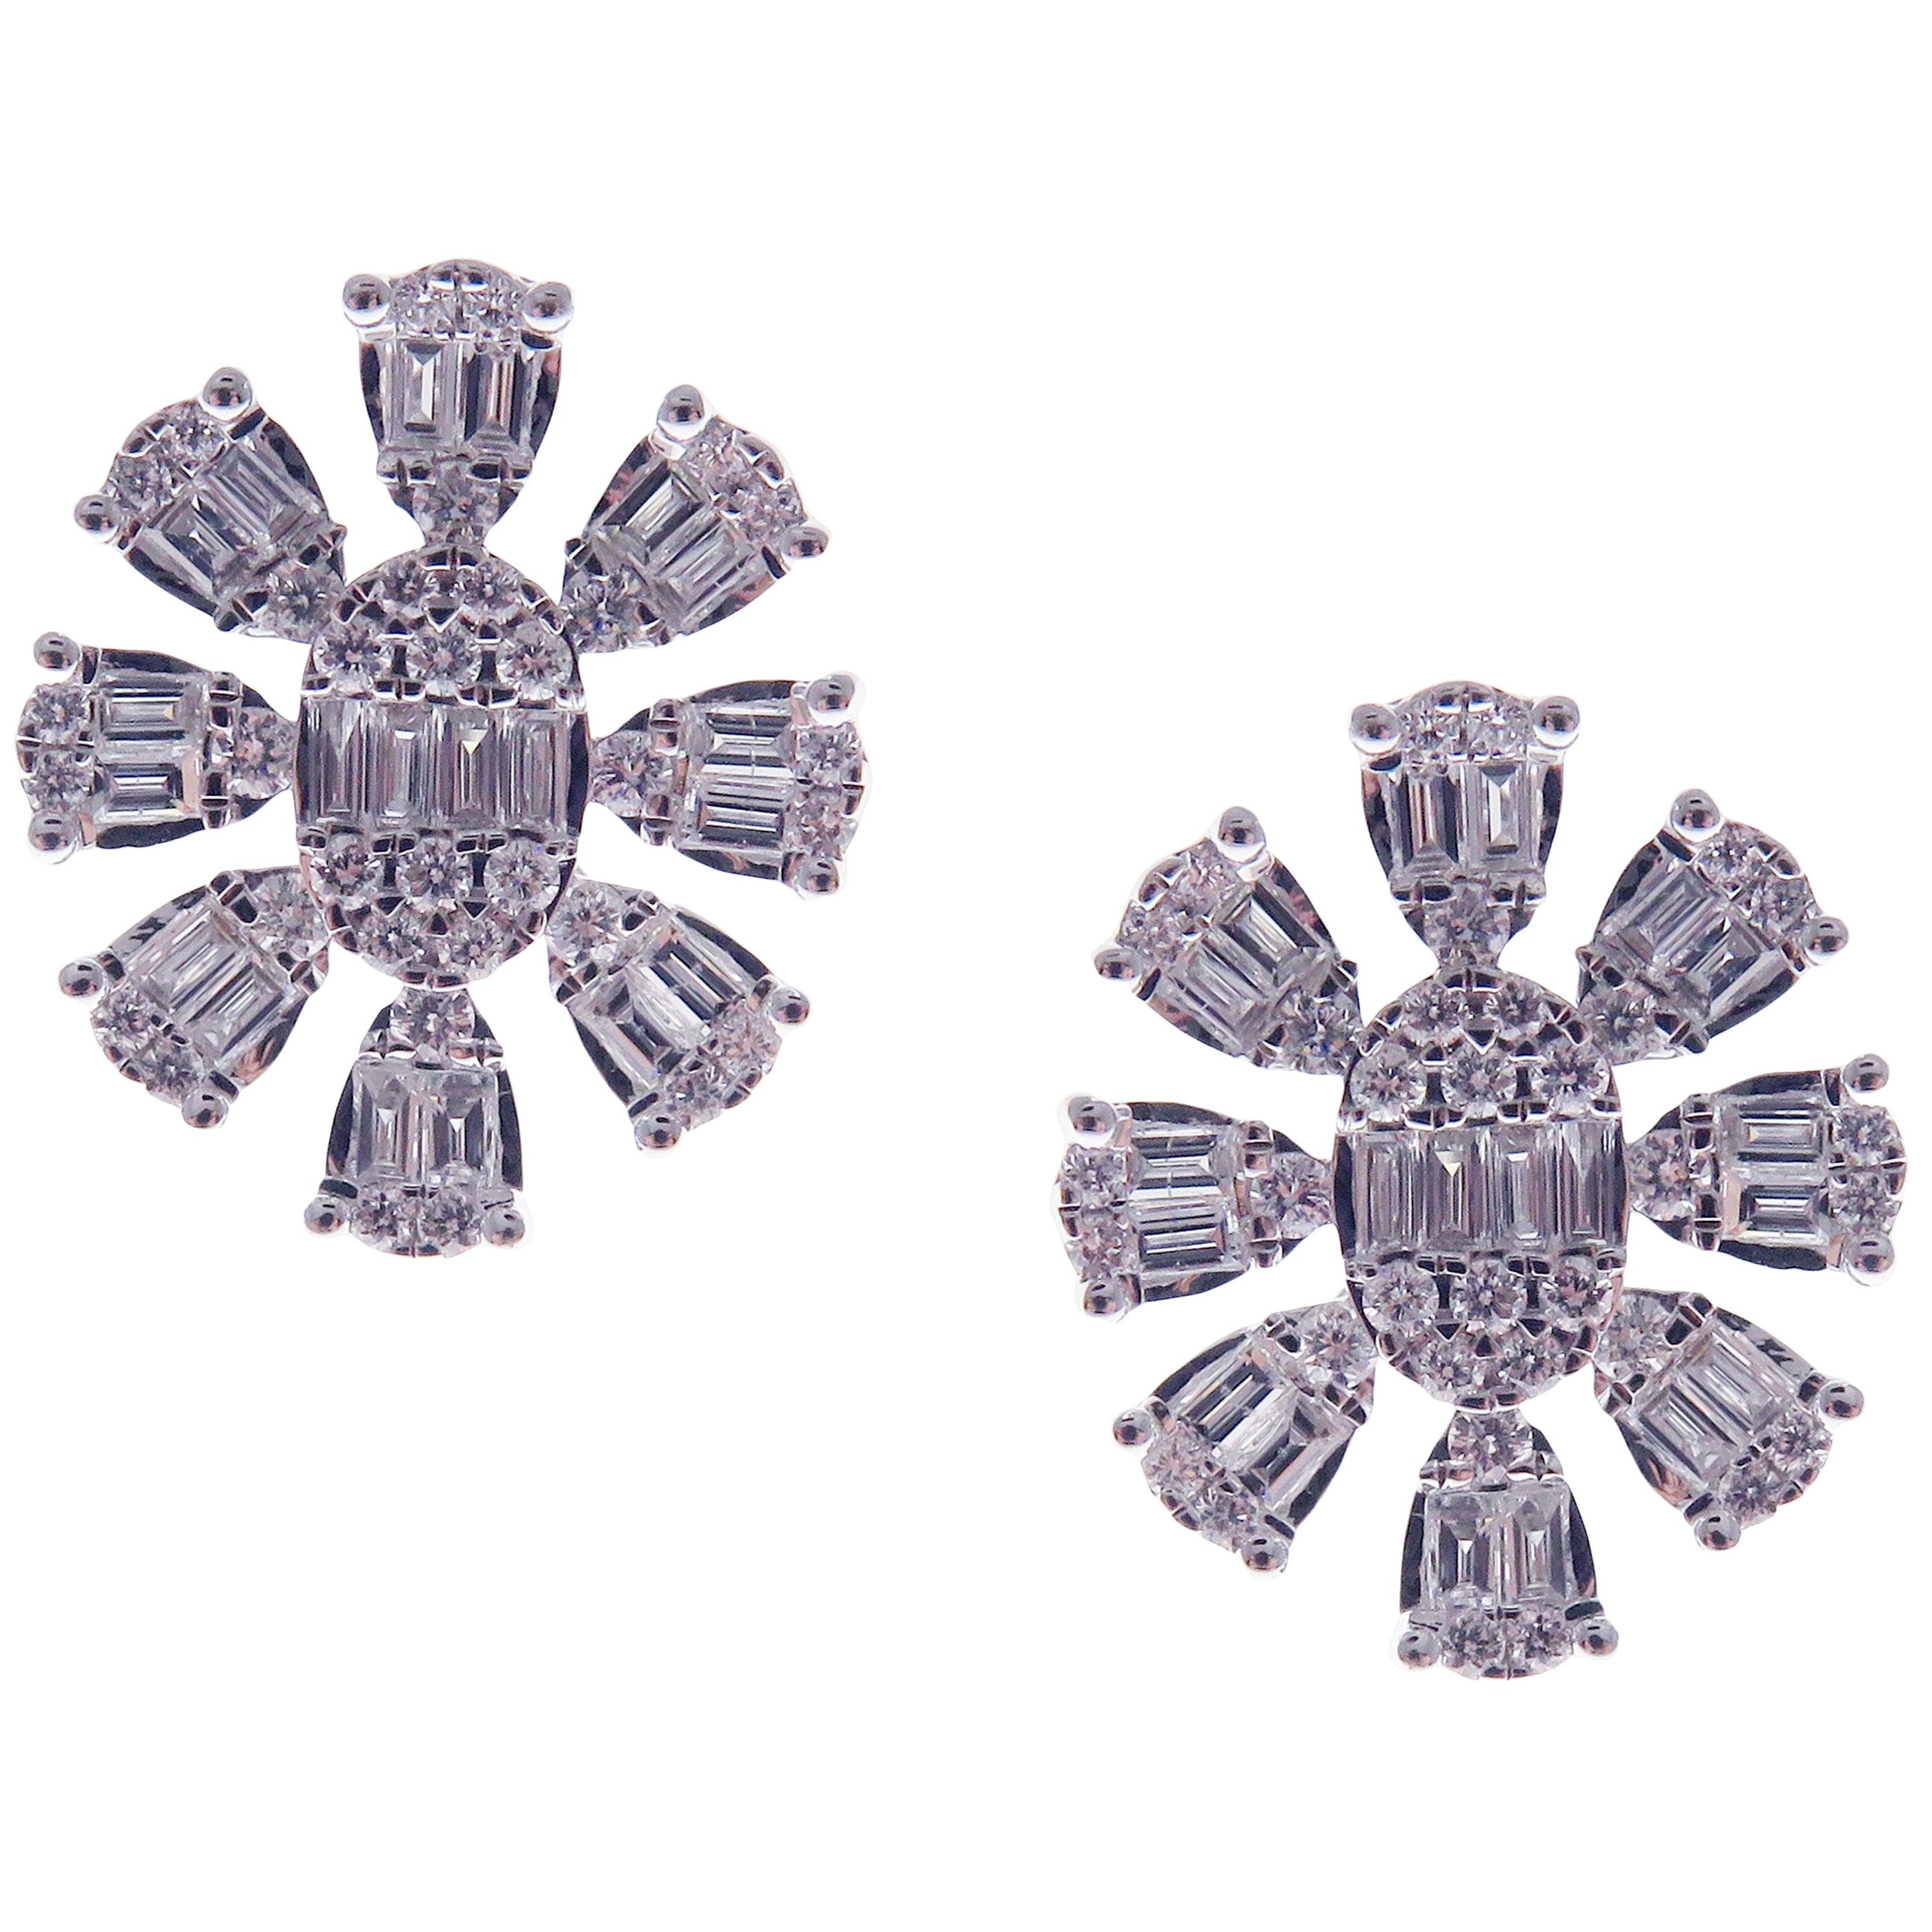 These trendy snowflake inspired stud earrings with round and baguette white diamonds are crafted in 18-karat white gold, featuring 68 round white diamonds totaling of 0.50 carats and 40 baguette white diamonds totaling of 0.64 carats.
These earrings